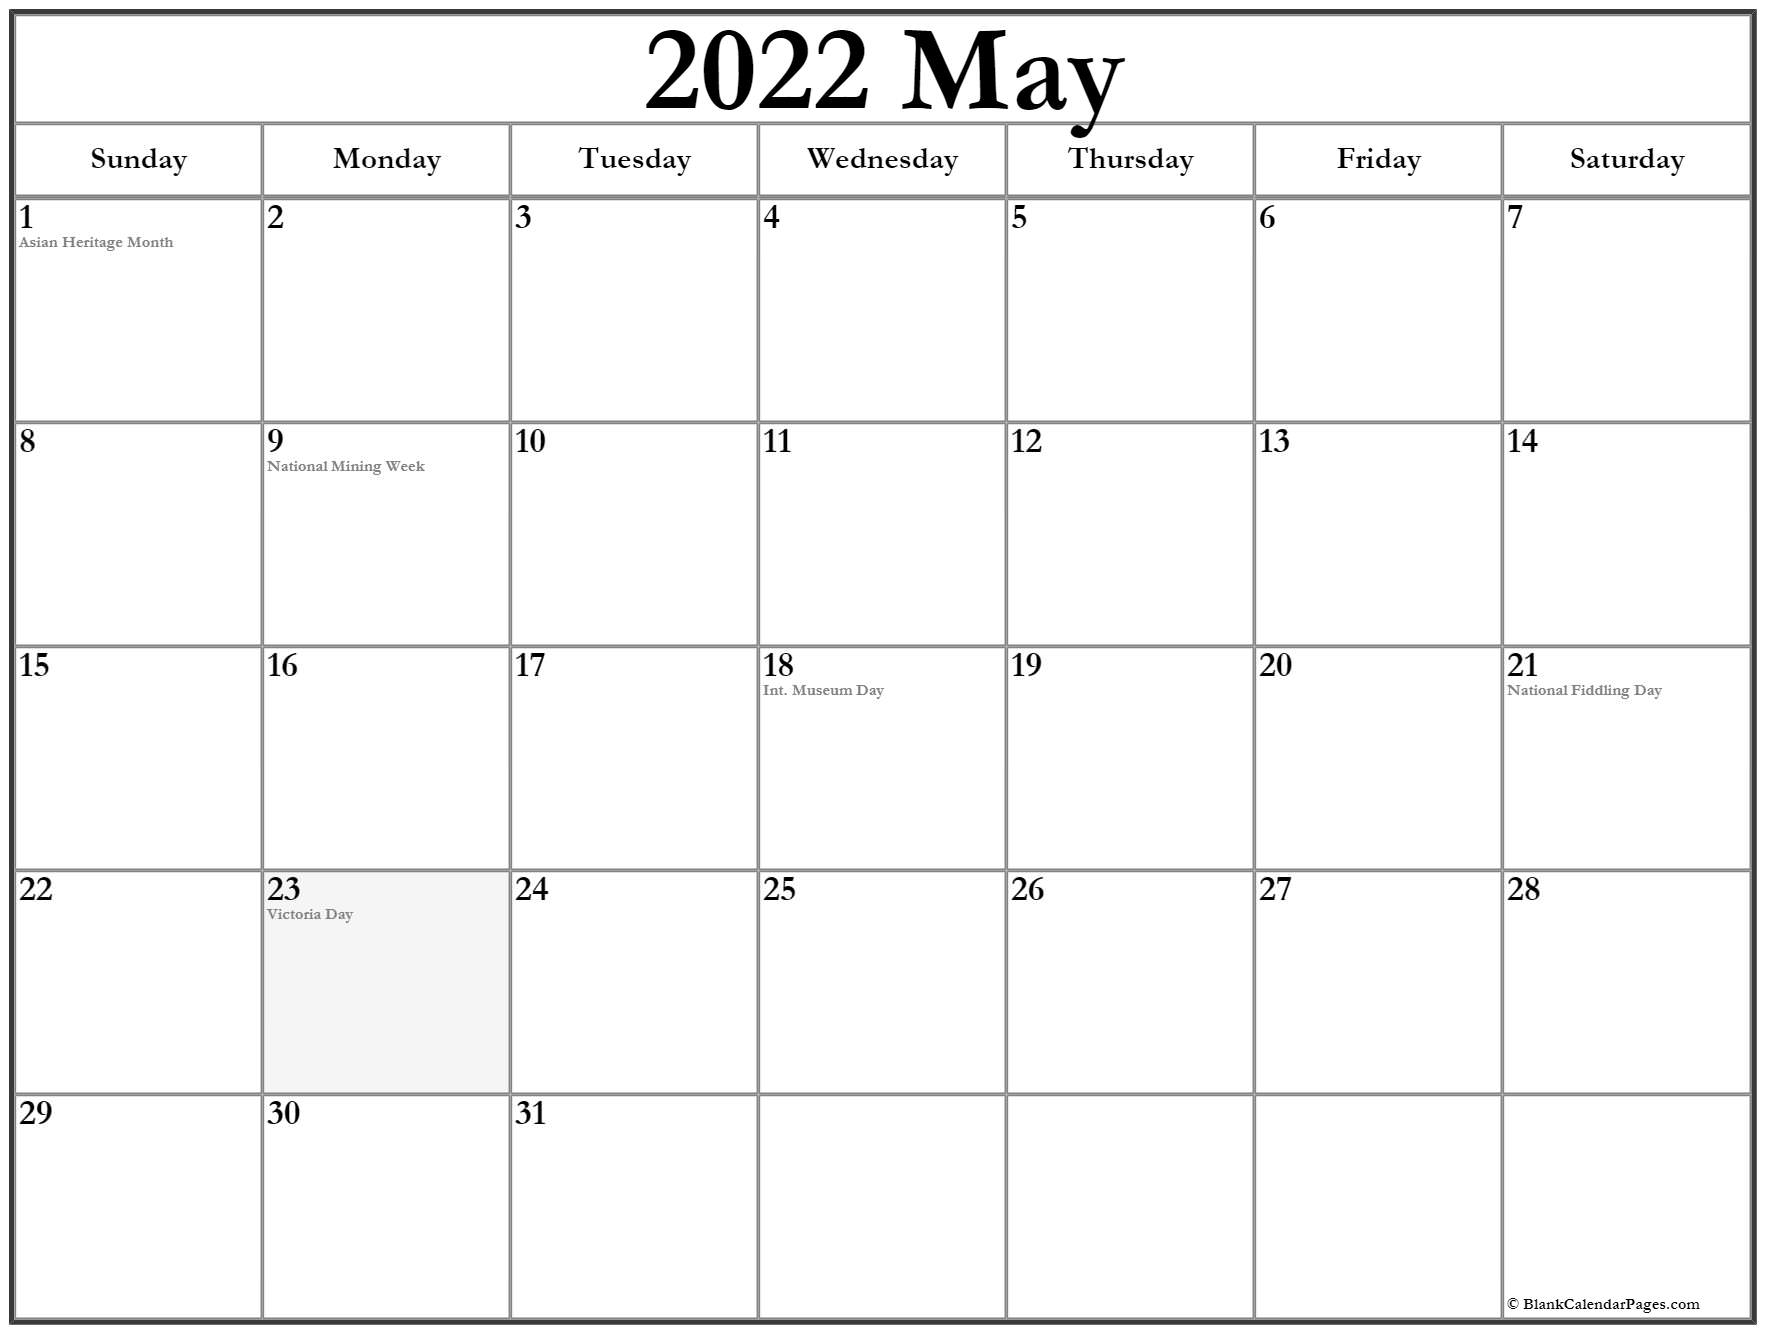 May 2022 calendar with holidays